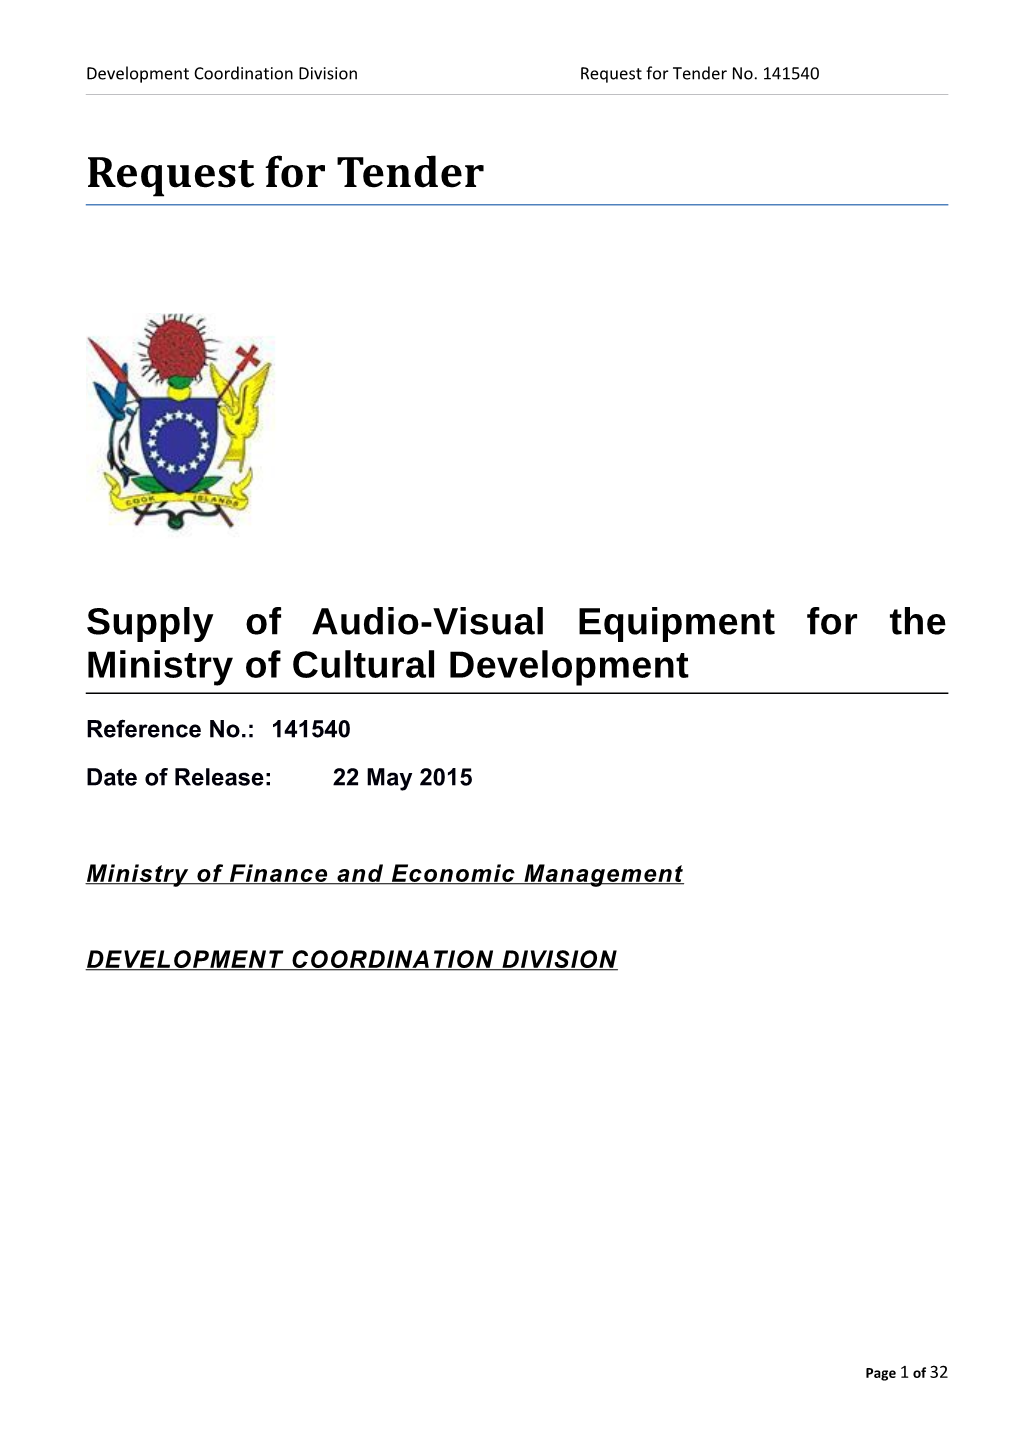 Supply of Audio-Visual Equipment for the Ministry of Cultural Development